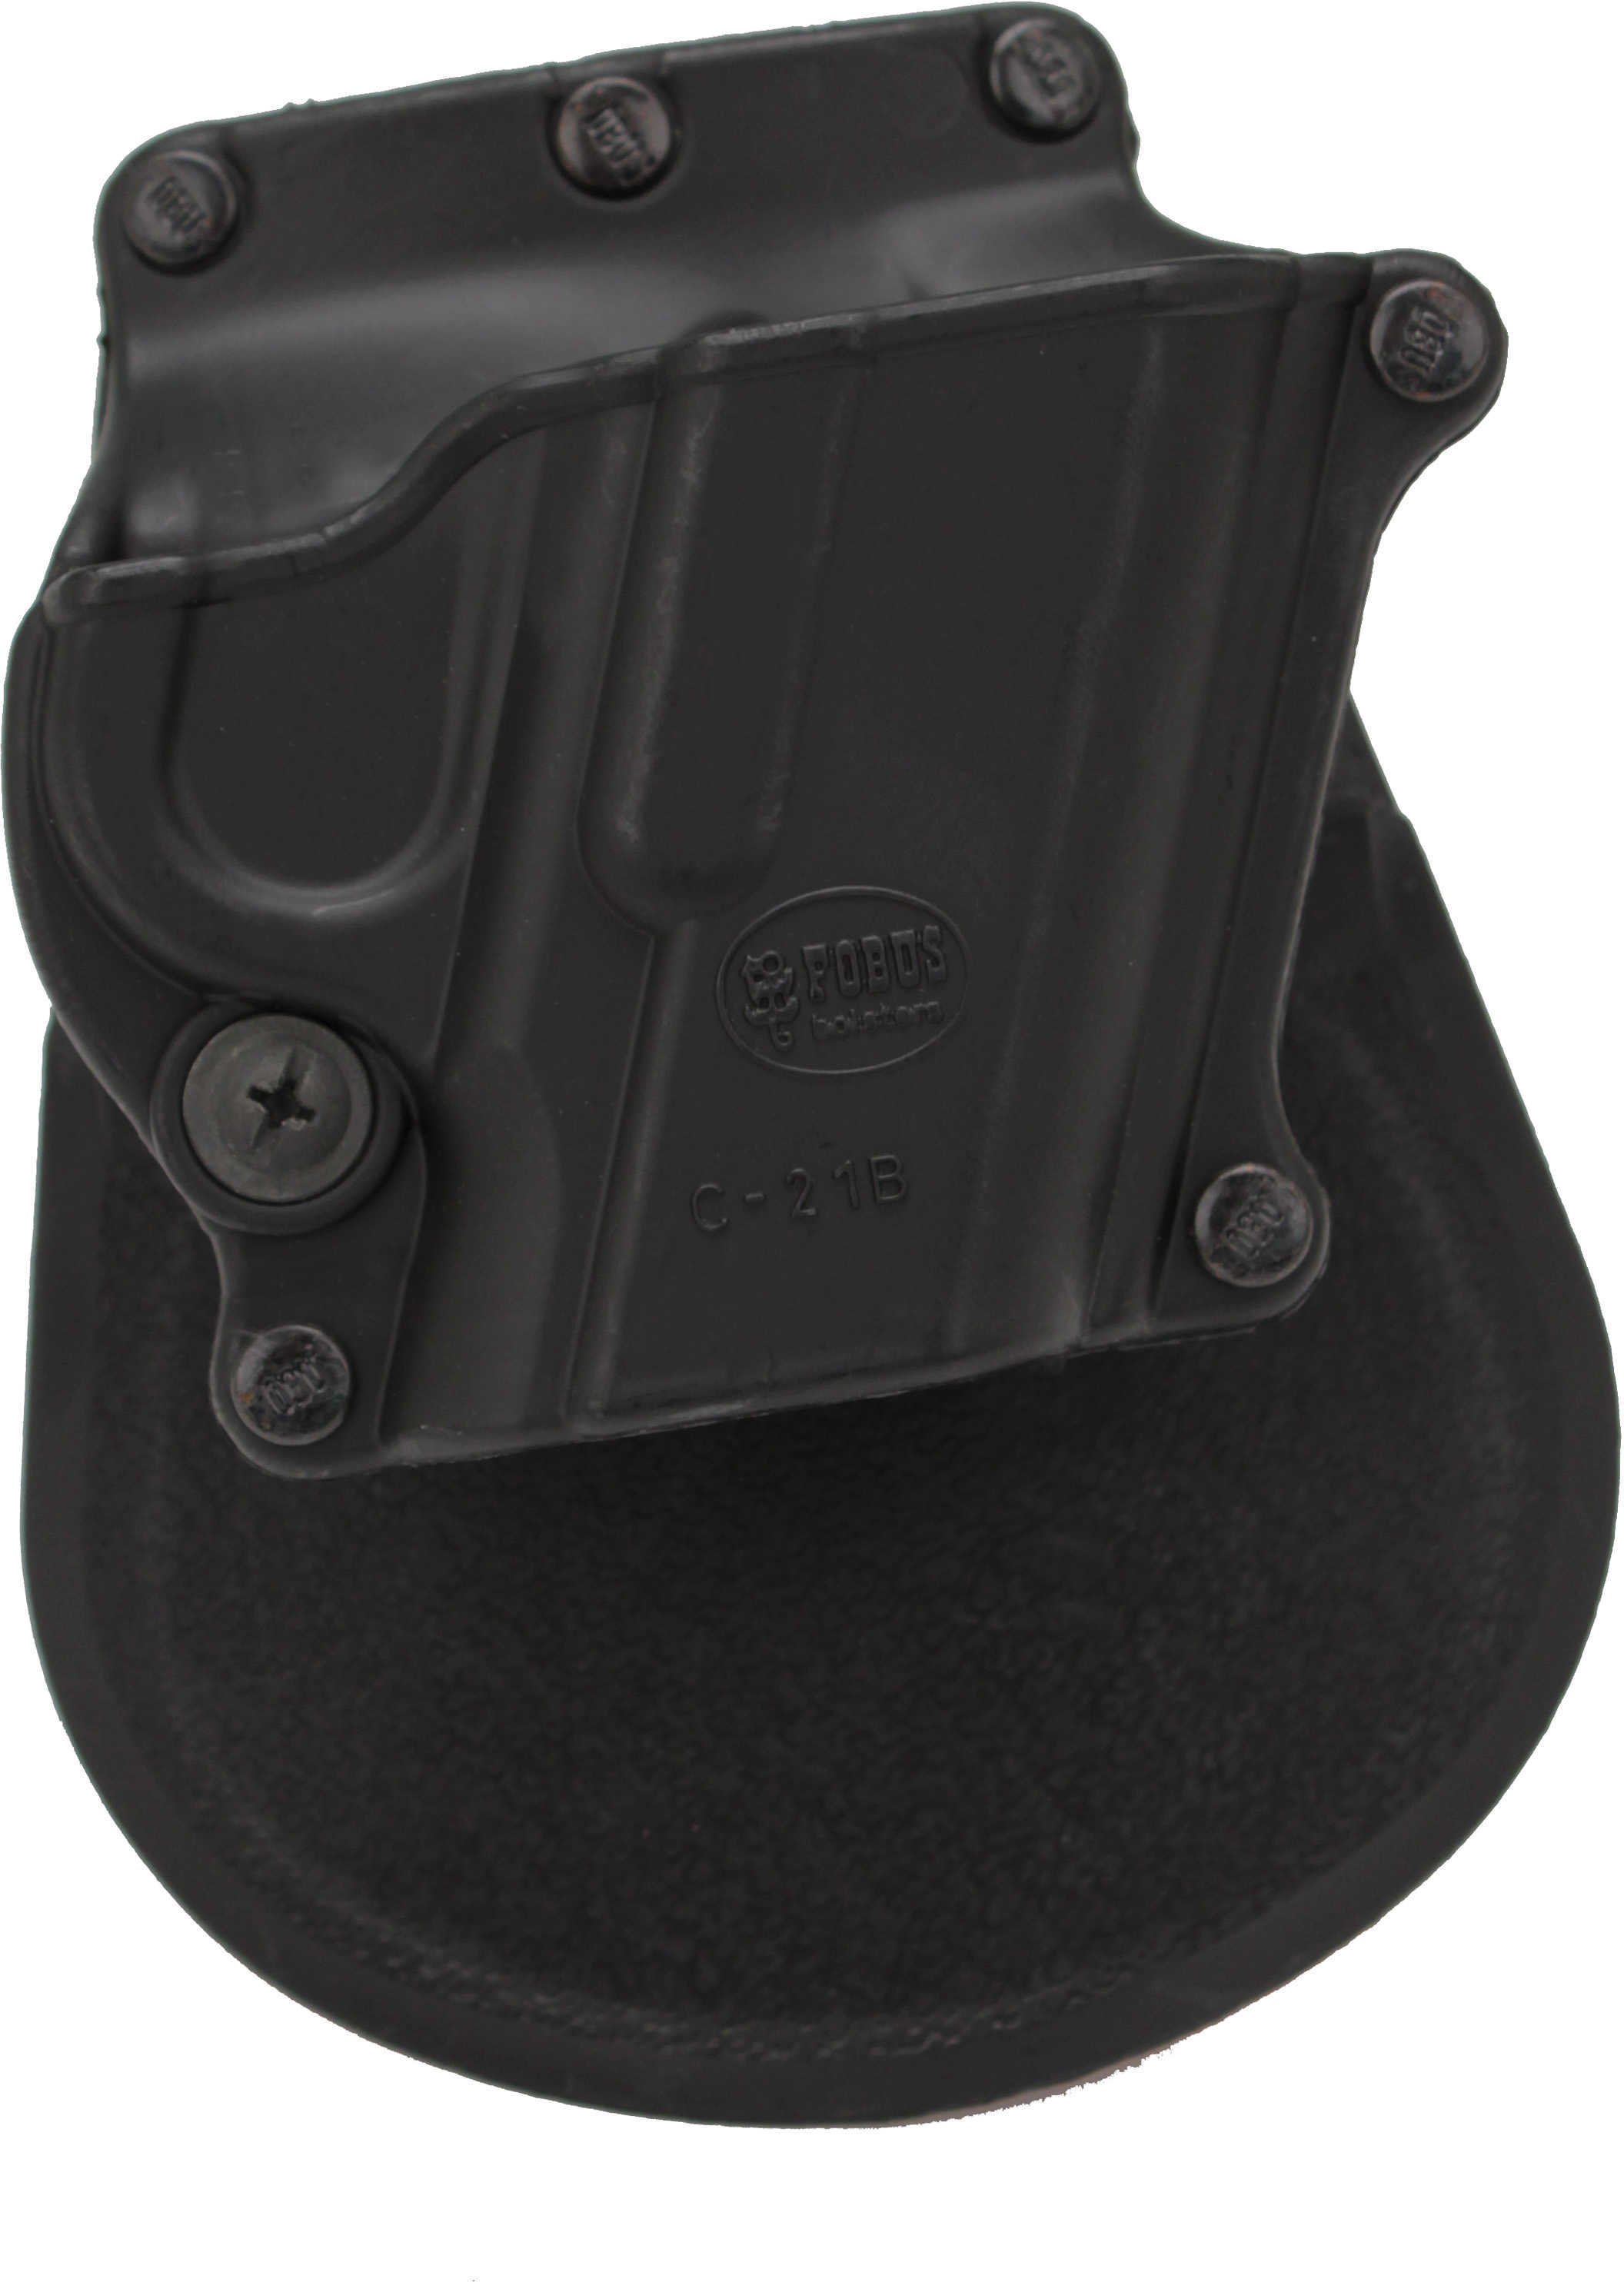 Fobus Compact Paddle Holster